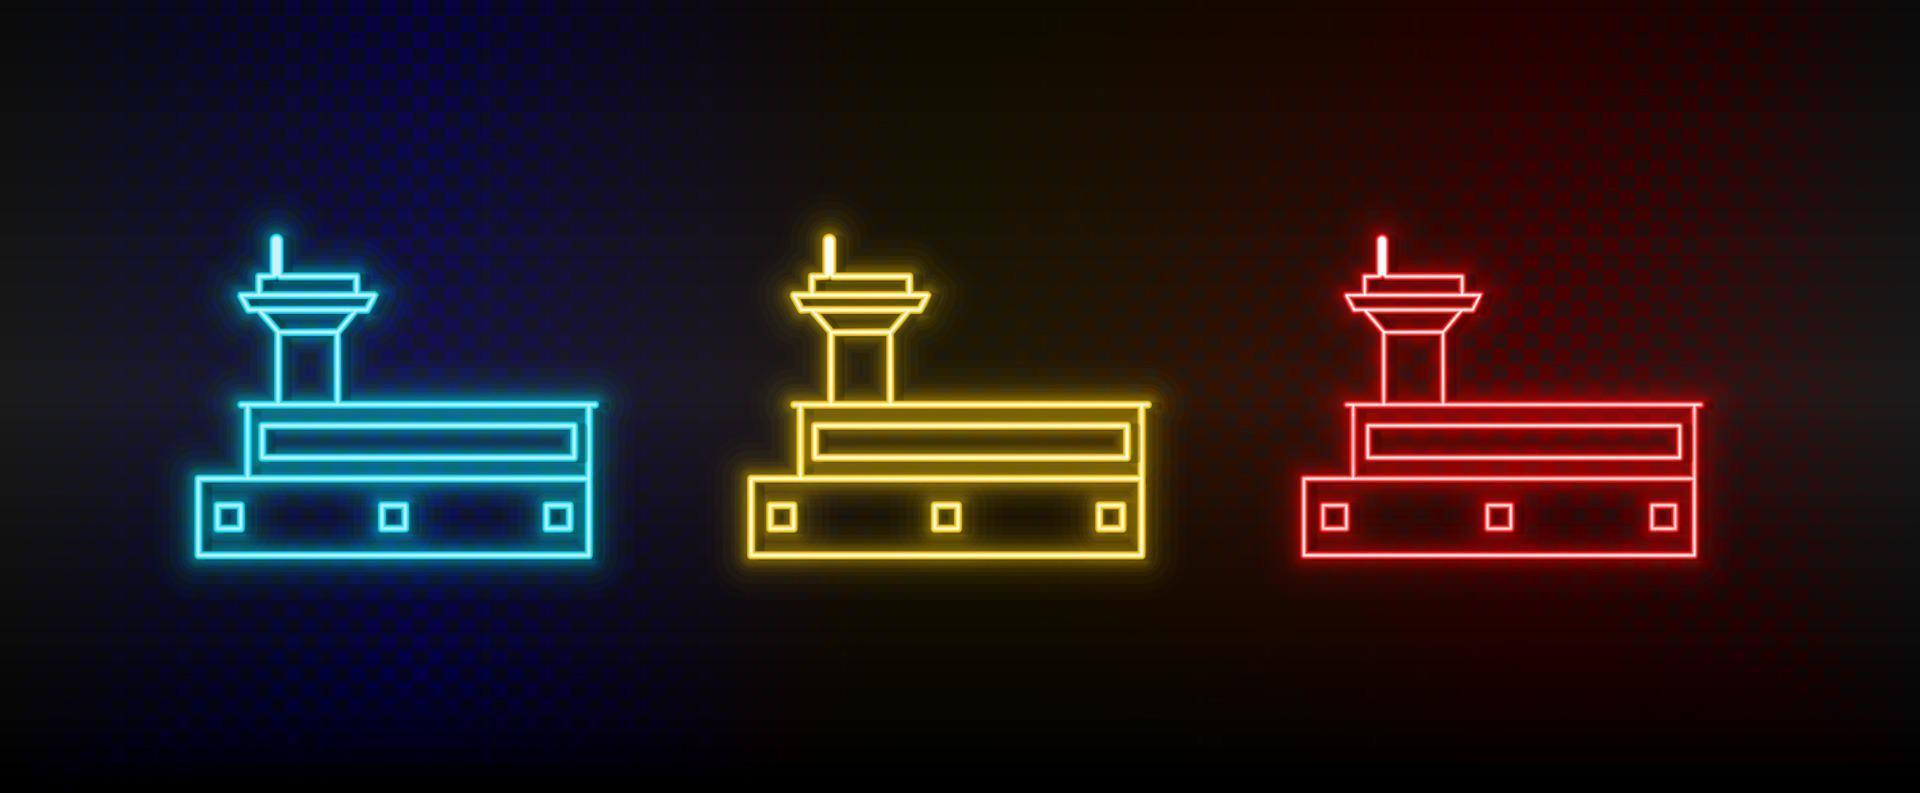 Neon icons. Building. Set of red, blue, yellow neon vector icon on dark background